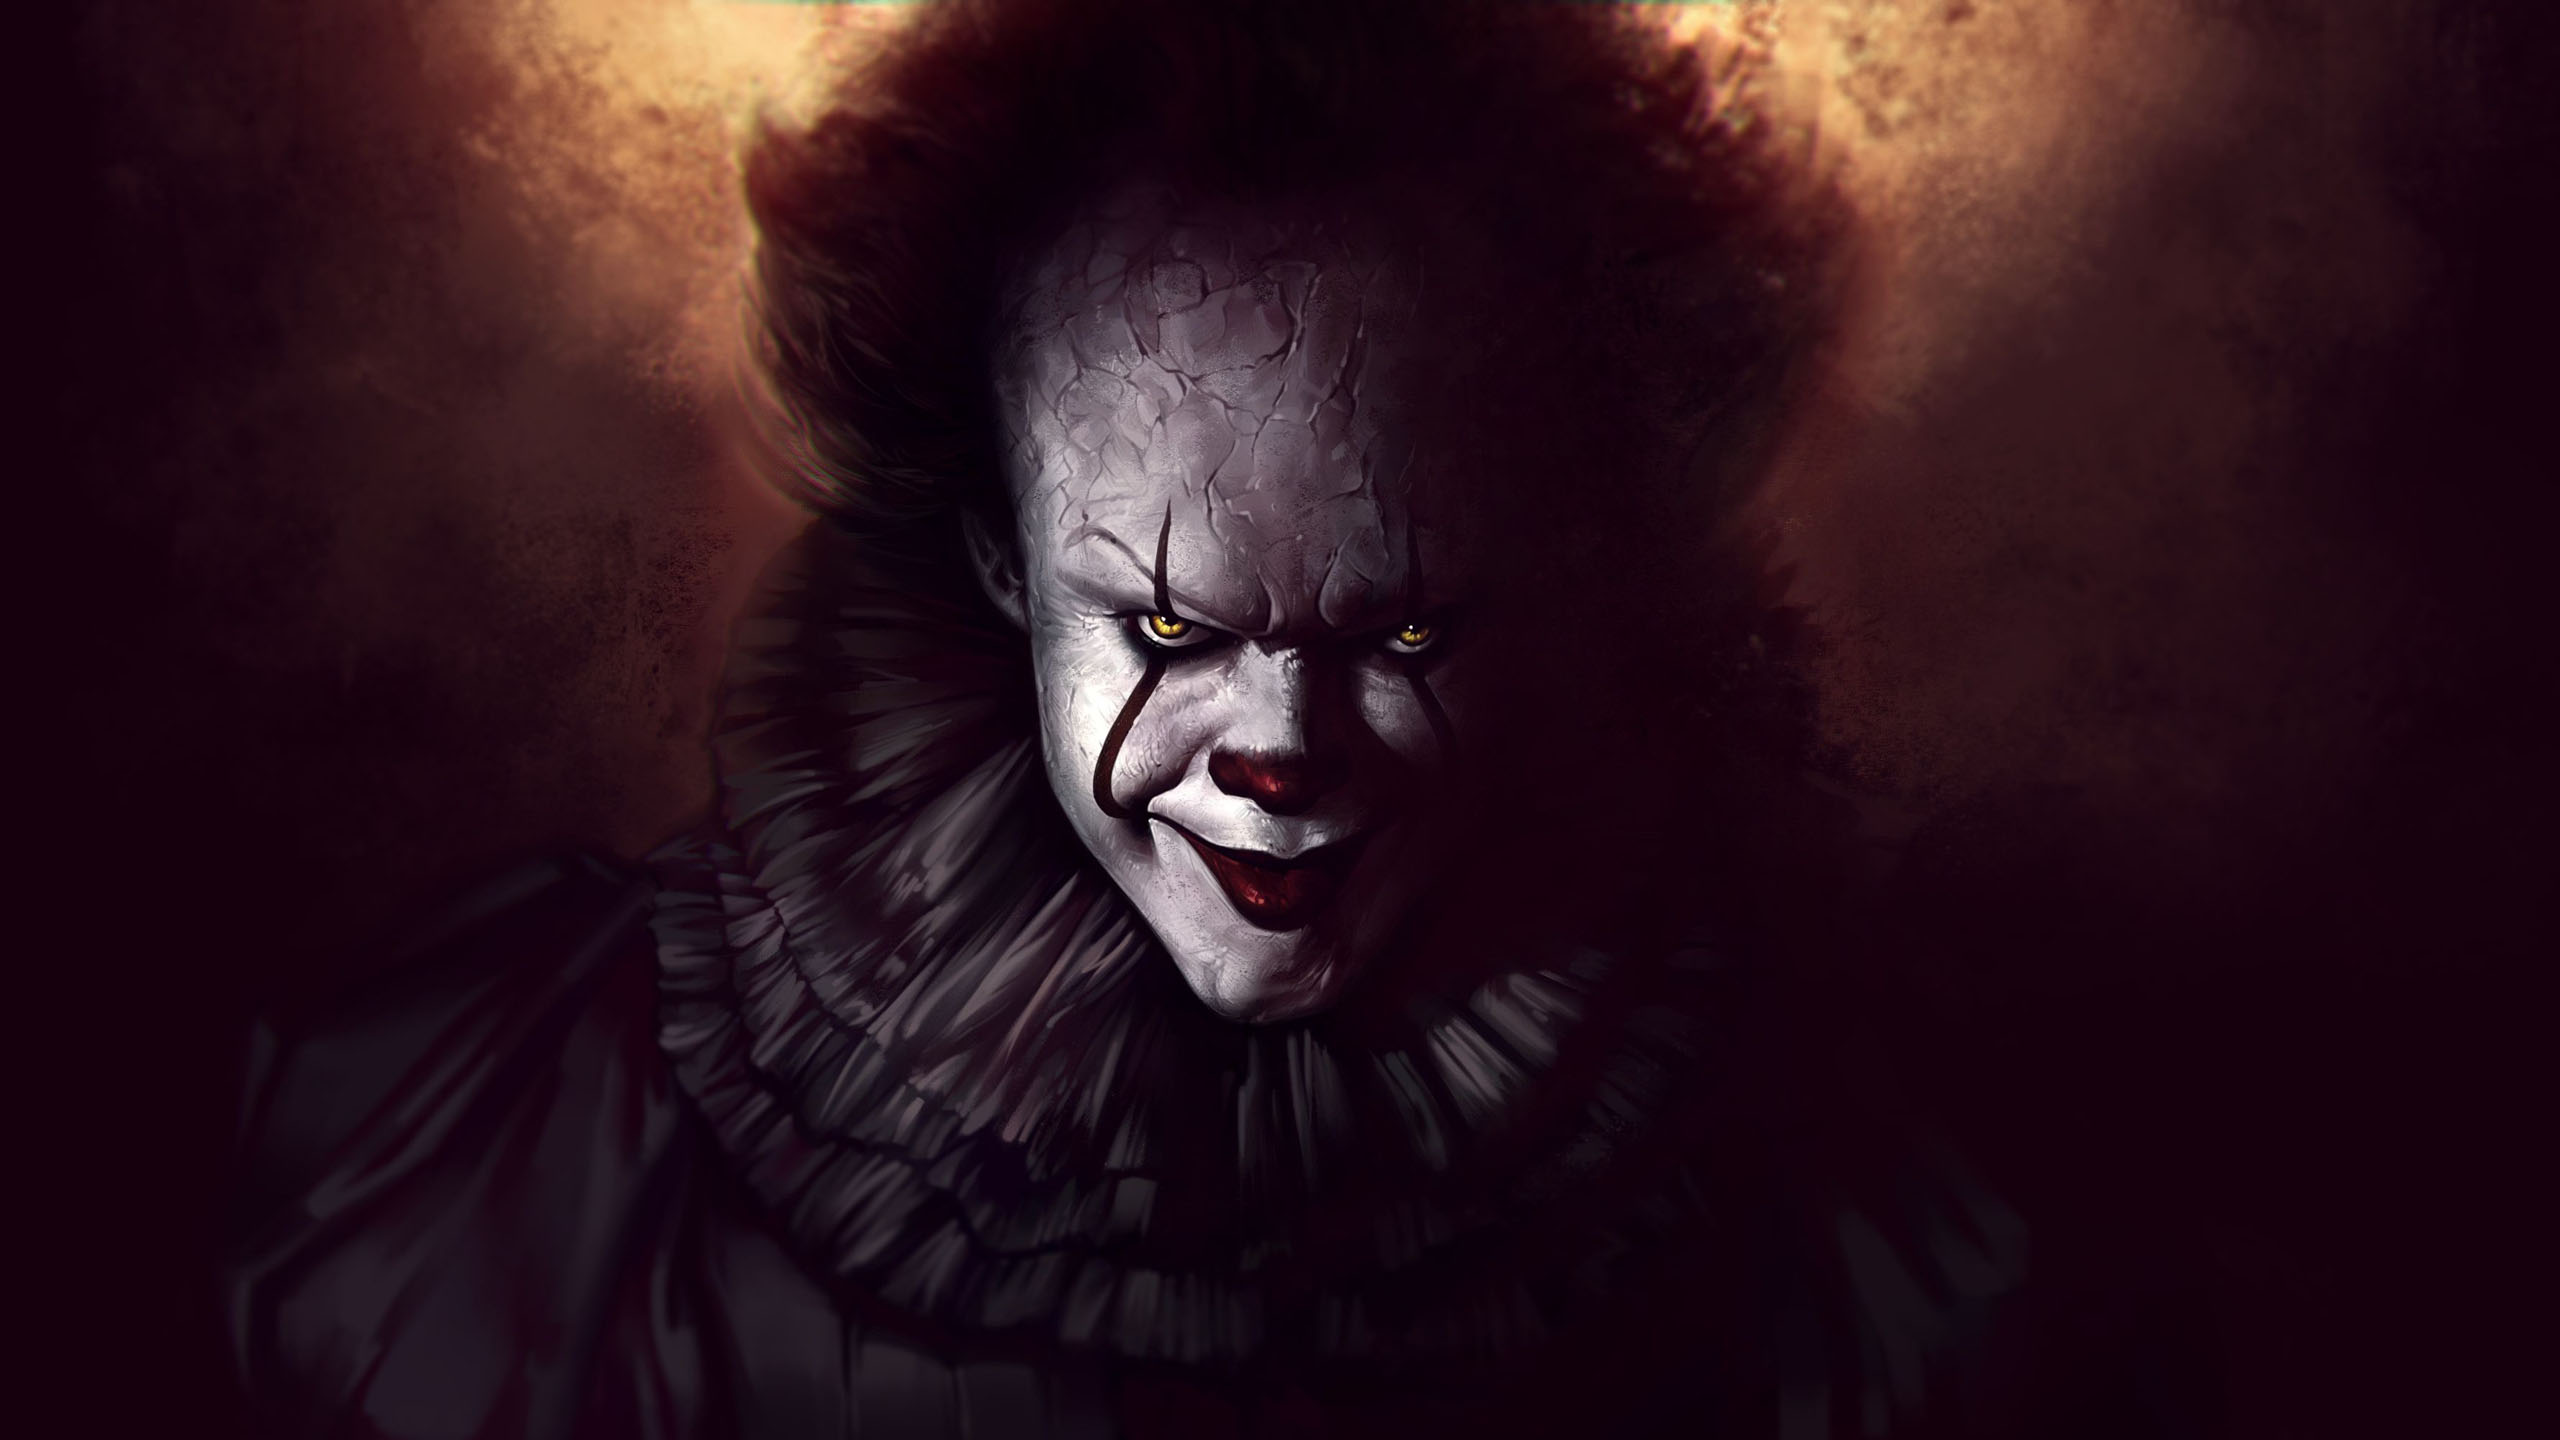 Pennywise In Dark Wallpaper HD Pennywise